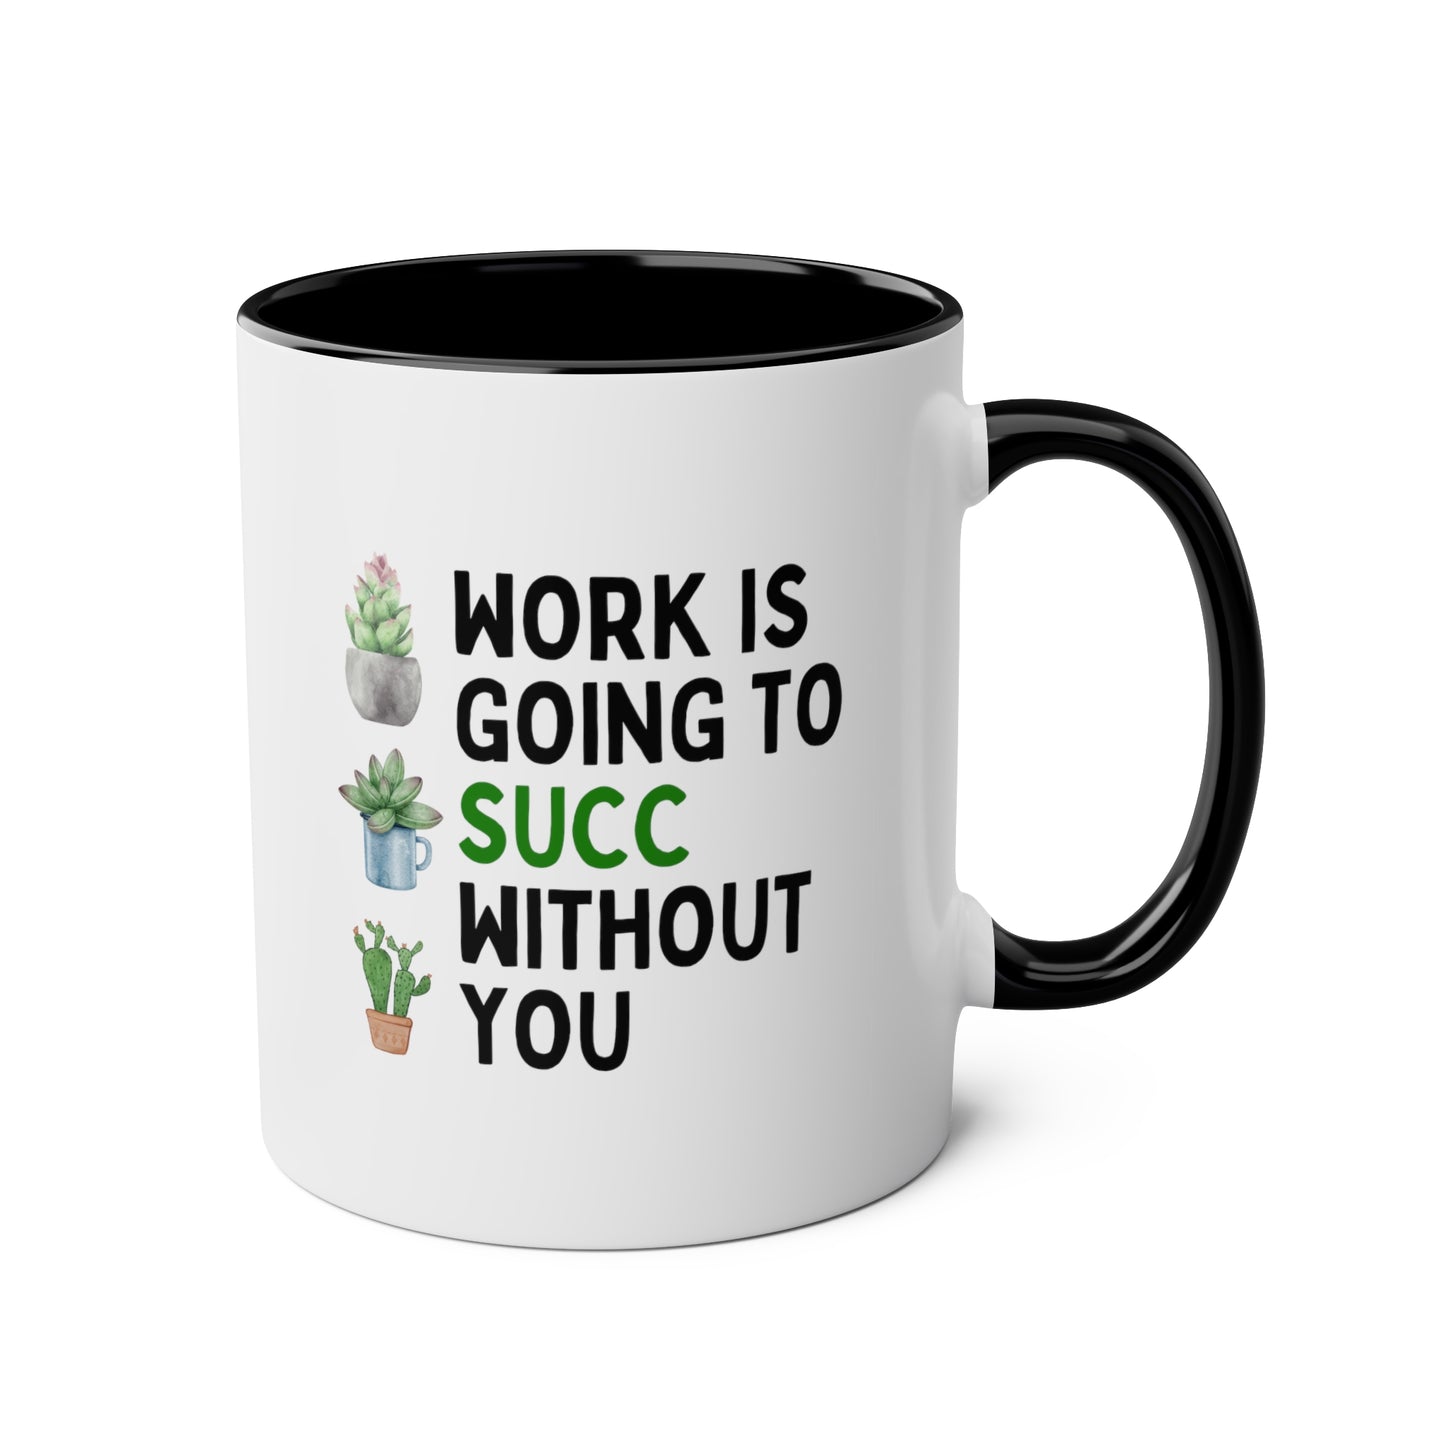 Work Is Going To Succ Without You 11oz white with black accent funny large coffee mug gift for coworker colleague leaving farewell plant lover succulents waveywares wavey wares wavywares wavy wares